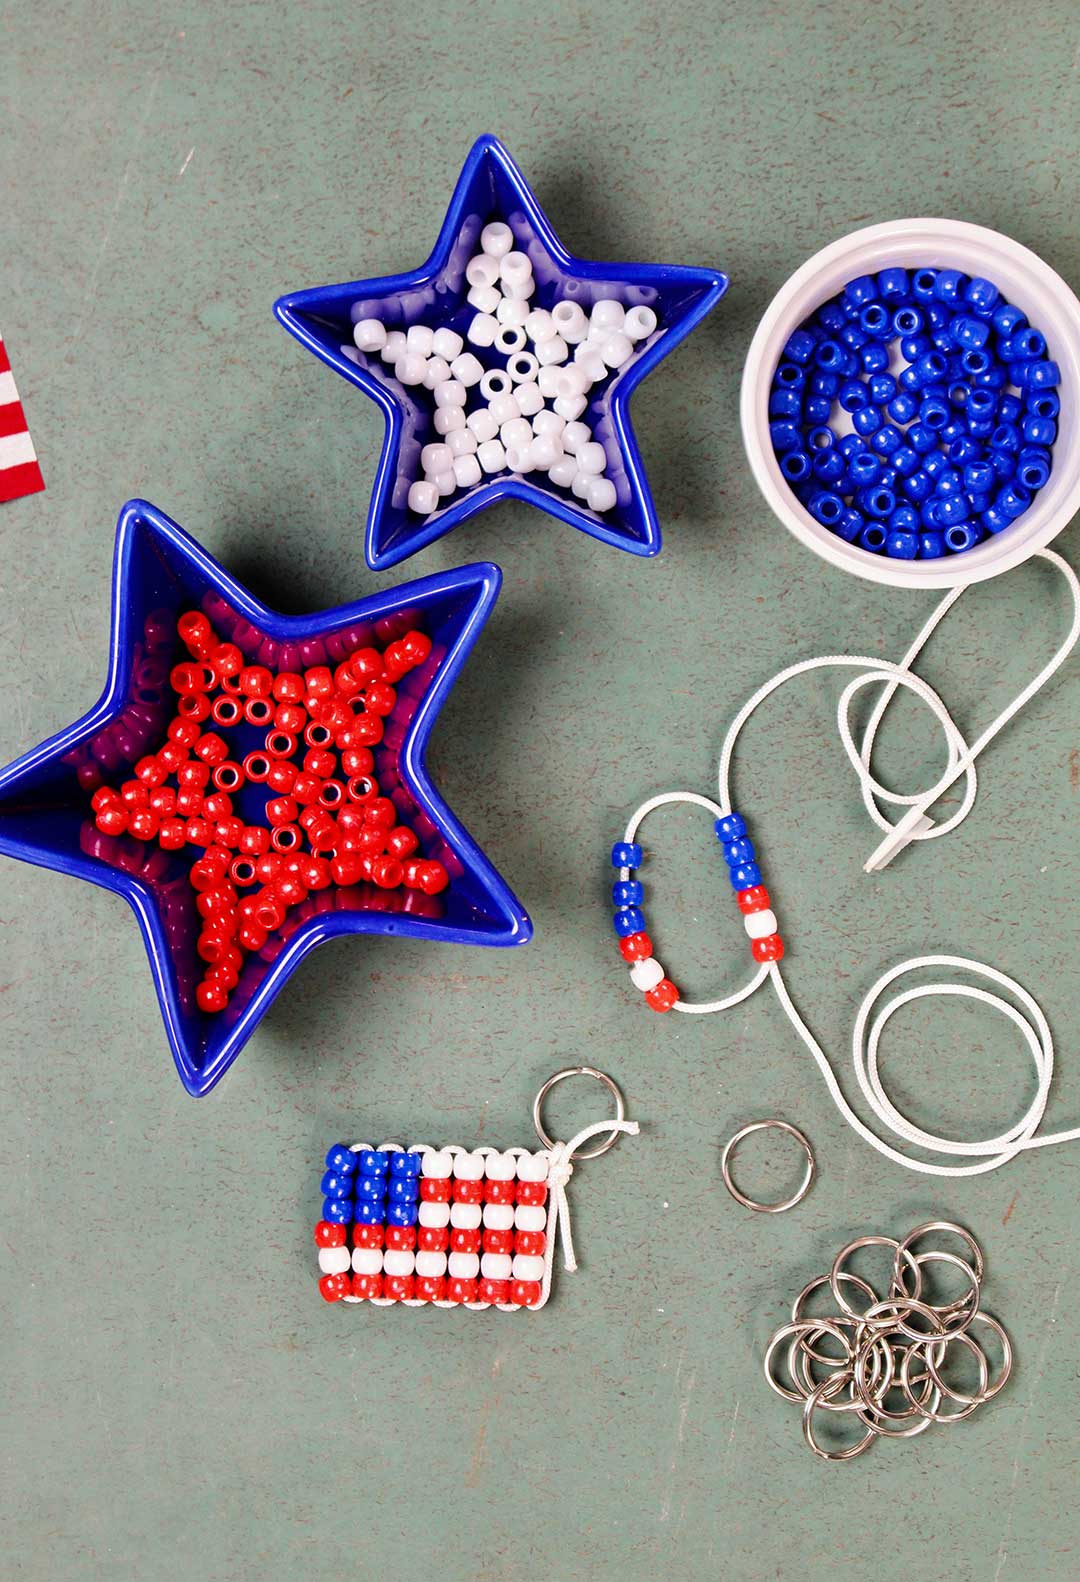 Three dishes of red, white and blue pony beads with a finished beaded flag keychain and key rings resting on a green counter. White string with beads showing step 2.